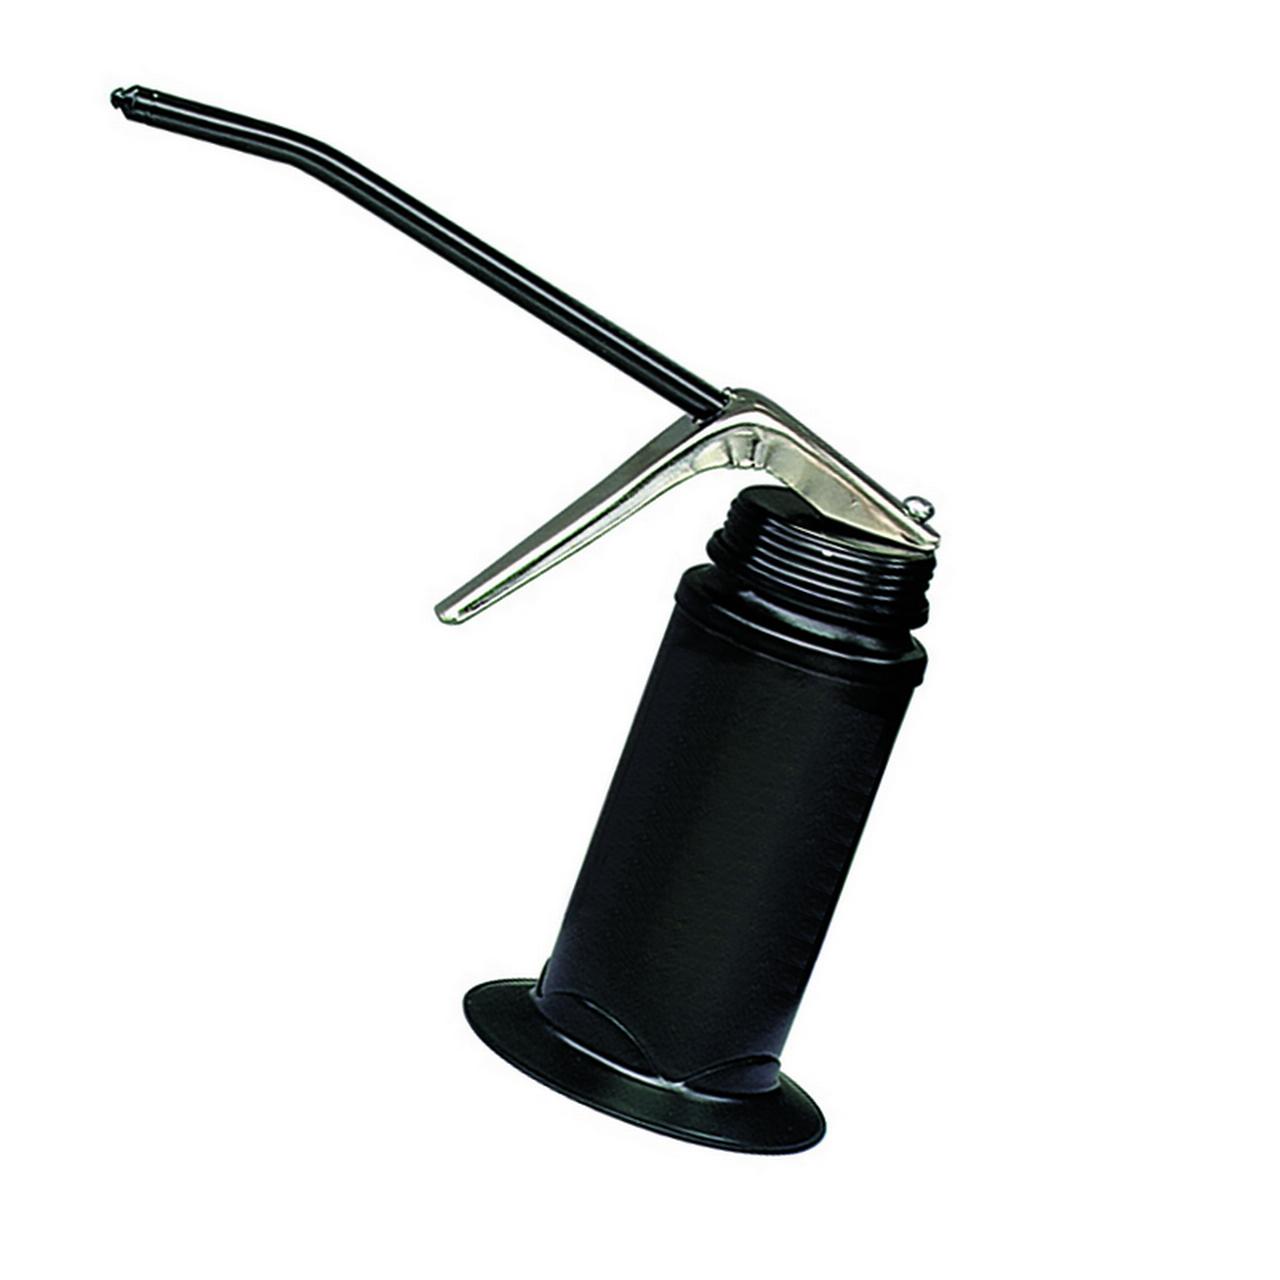 Plews 50-515 Epoxy Finish Pistol Oiler with Base Holder and 6 Rigid Spout - image 2 of 2